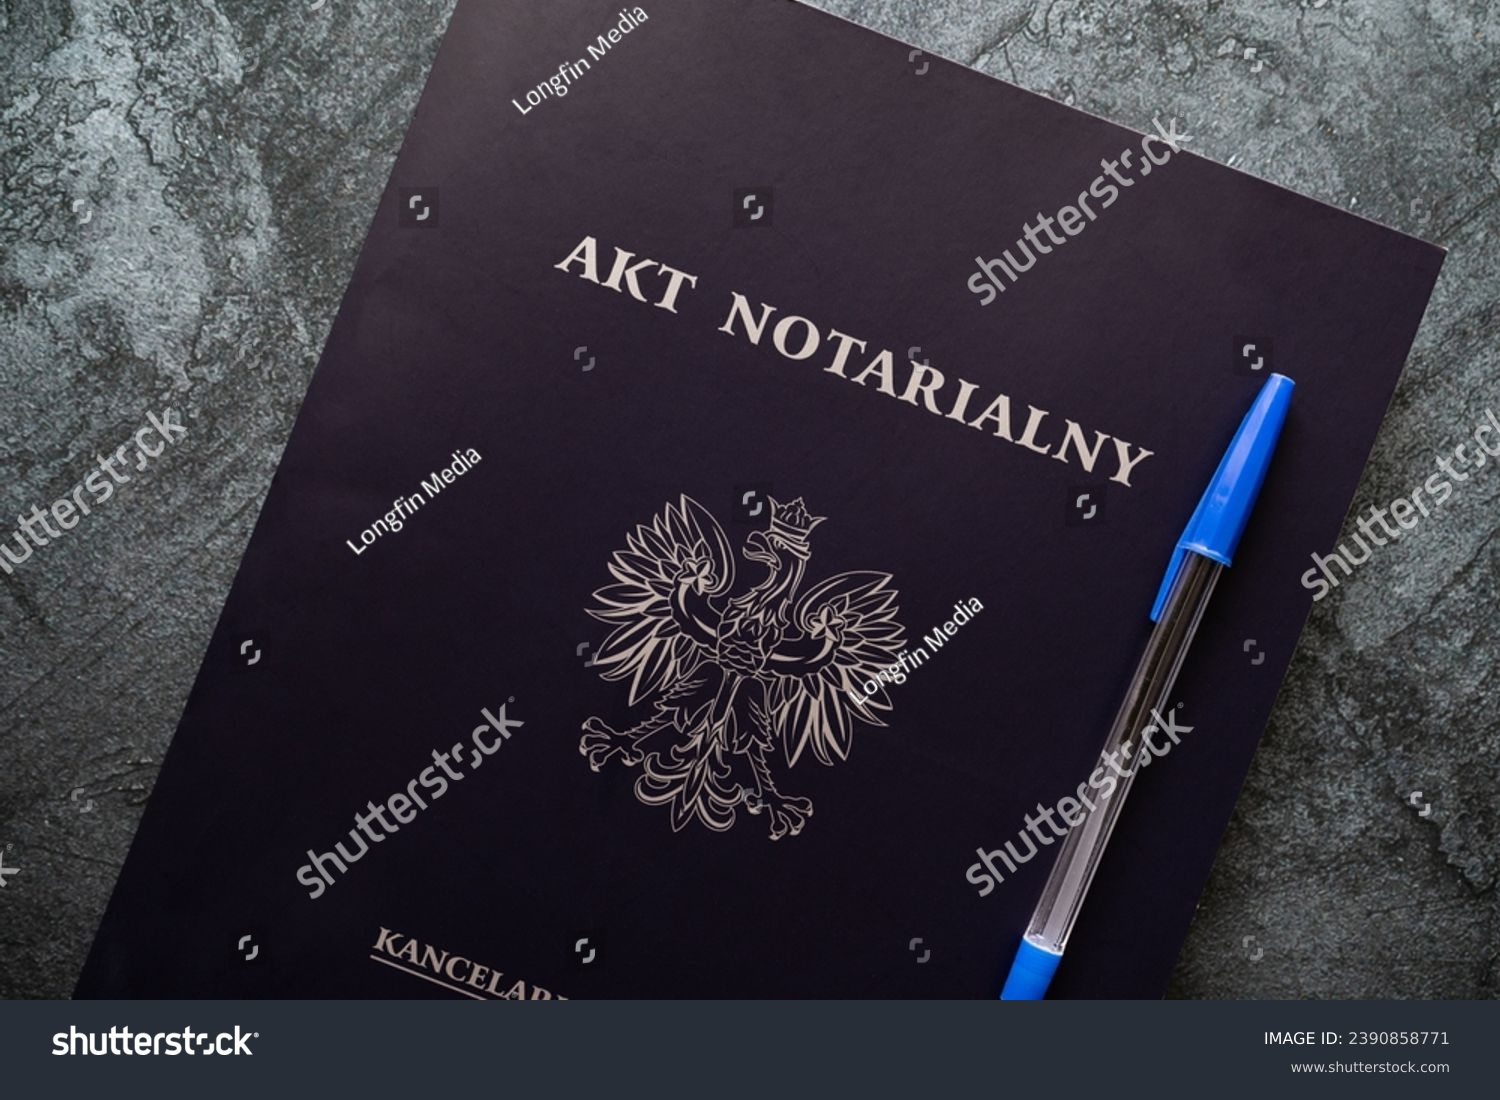 Notarial act, instrument or writing in Poland. Written document signed by a notary public. Akt notarialny in Polish language, means Notarial act, Kancelaria notarialna is Notary office. #2390858771